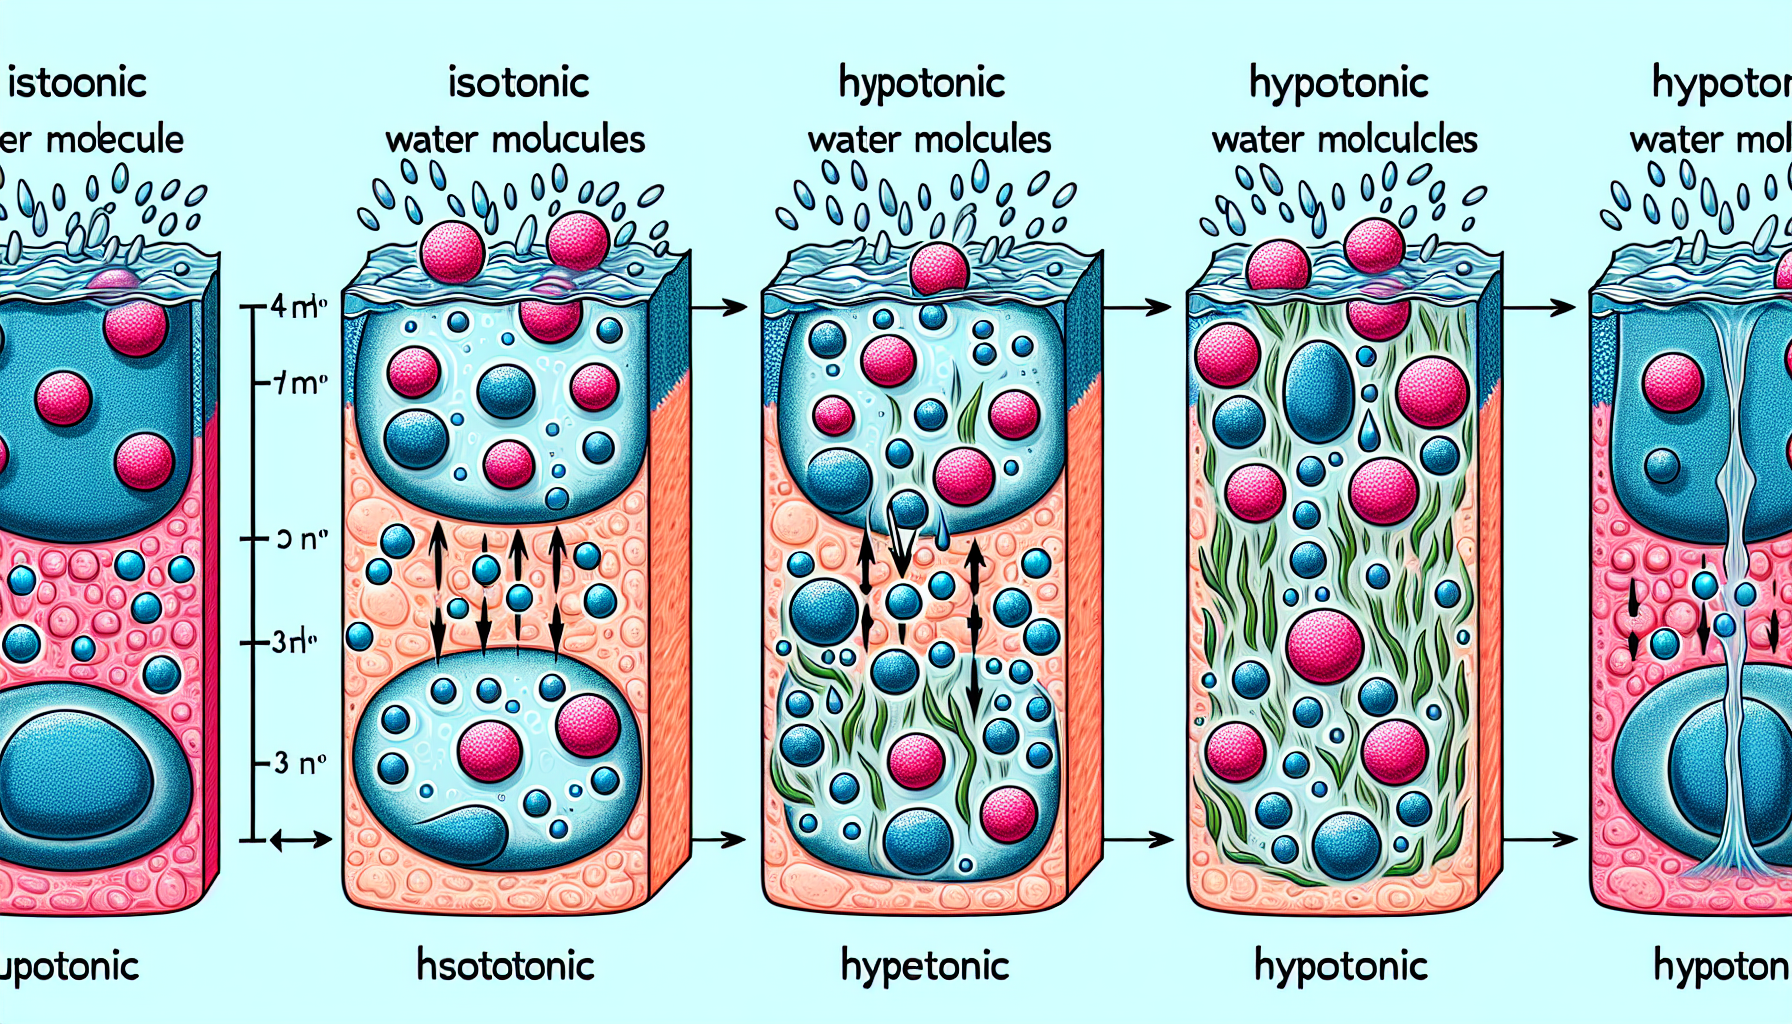 Illustration of isotonic, hypertonic, and hypotonic solutions affecting cells